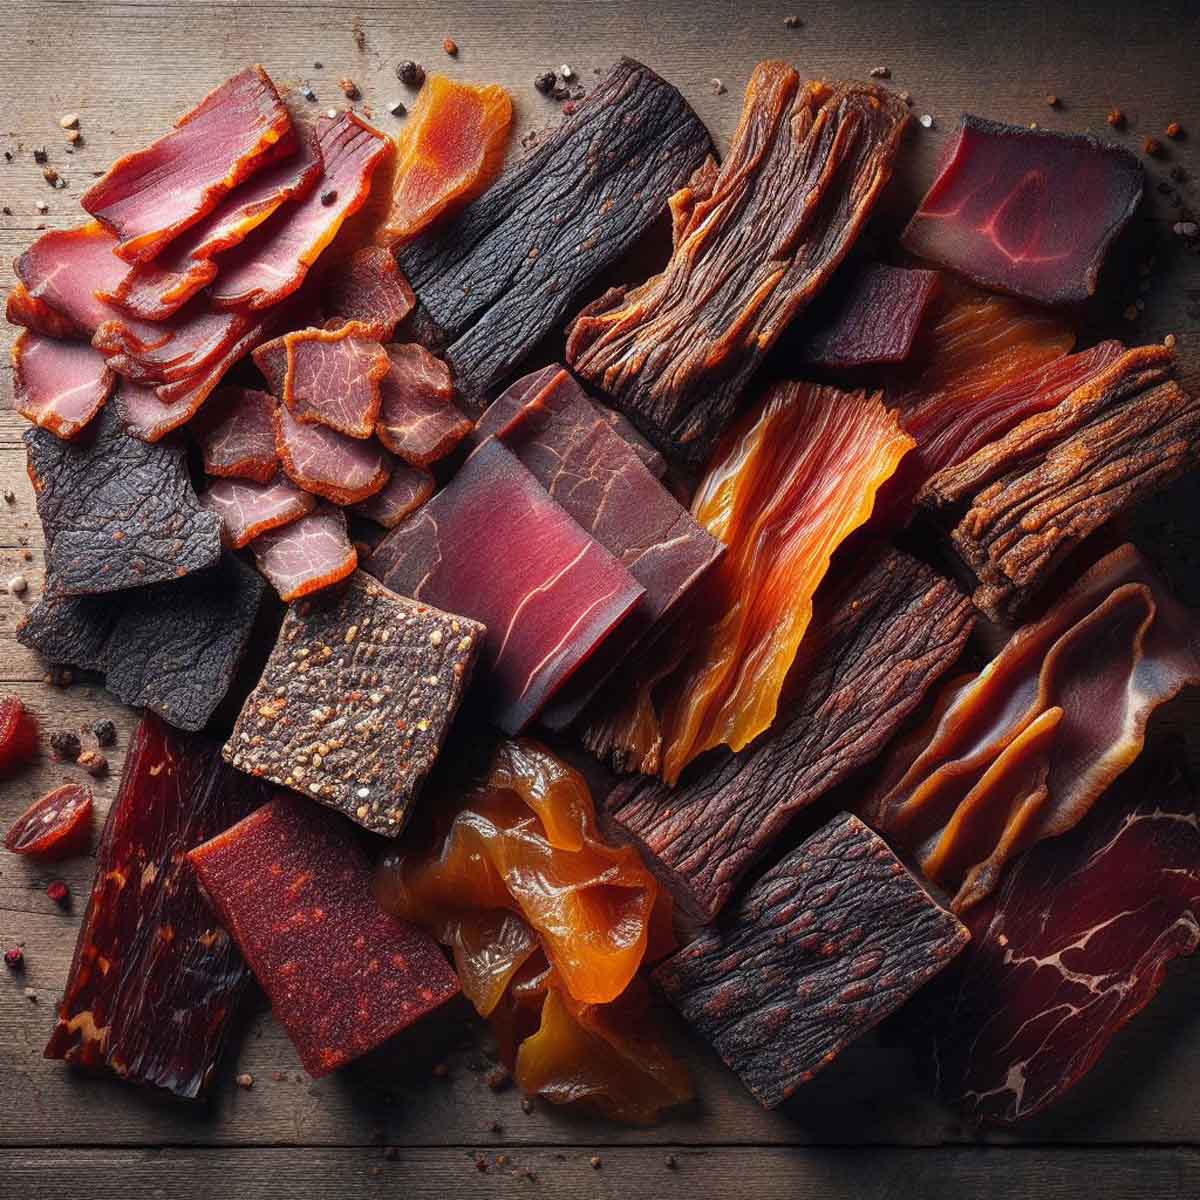 Assorted beef jerky types artistically arranged on a rustic wooden surface.